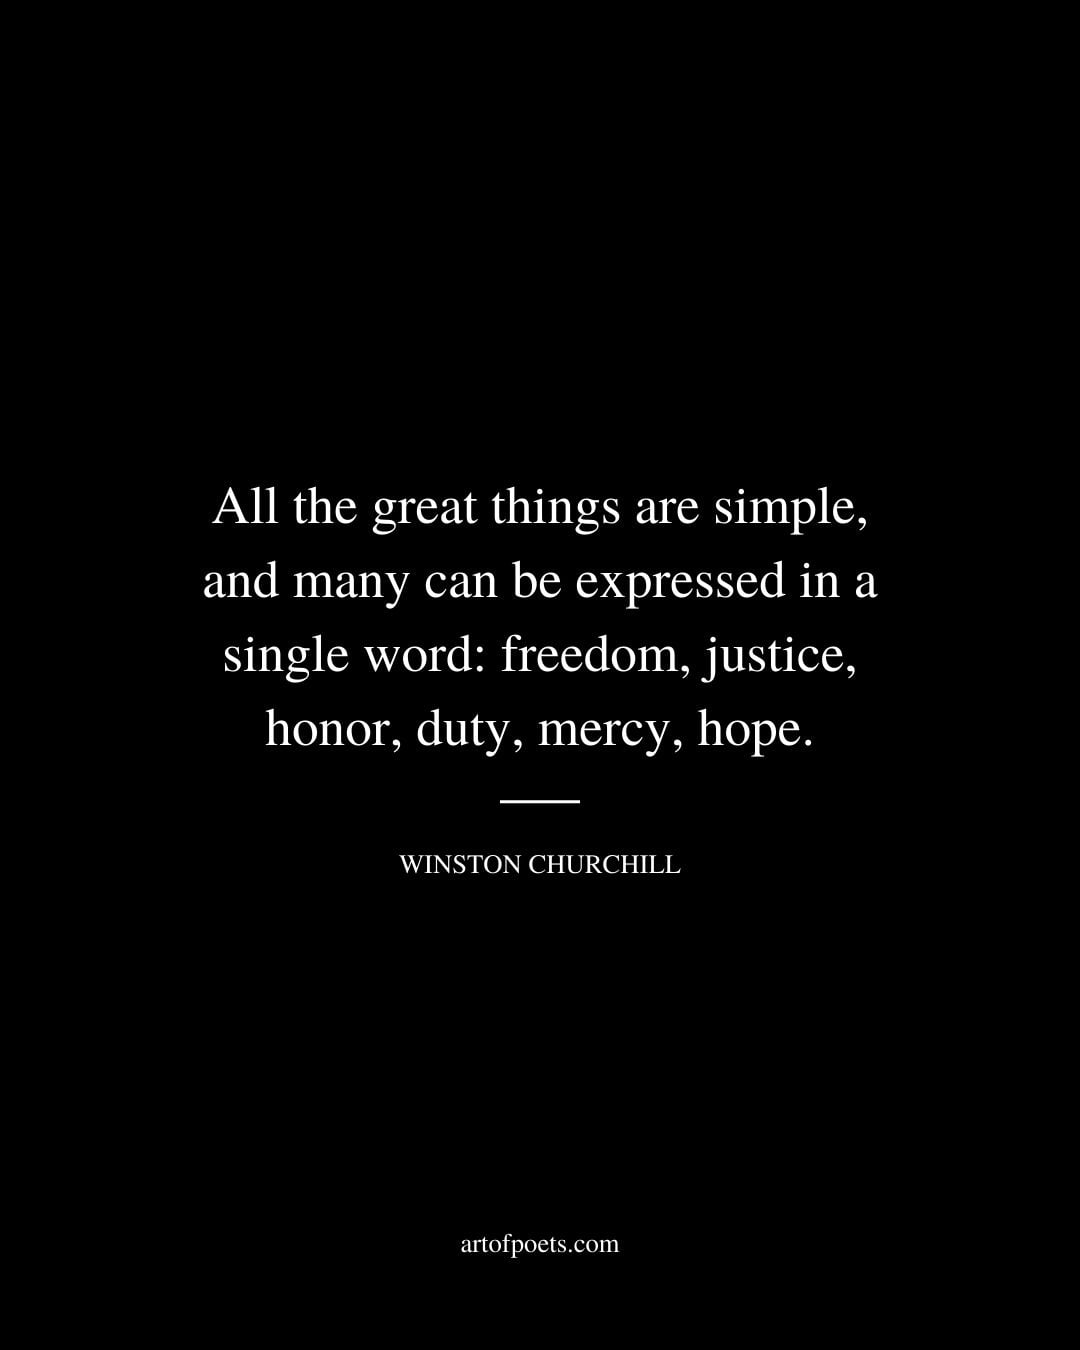 All the great things are simple and many can be expressed in a single word freedom justice honor duty mercy hope